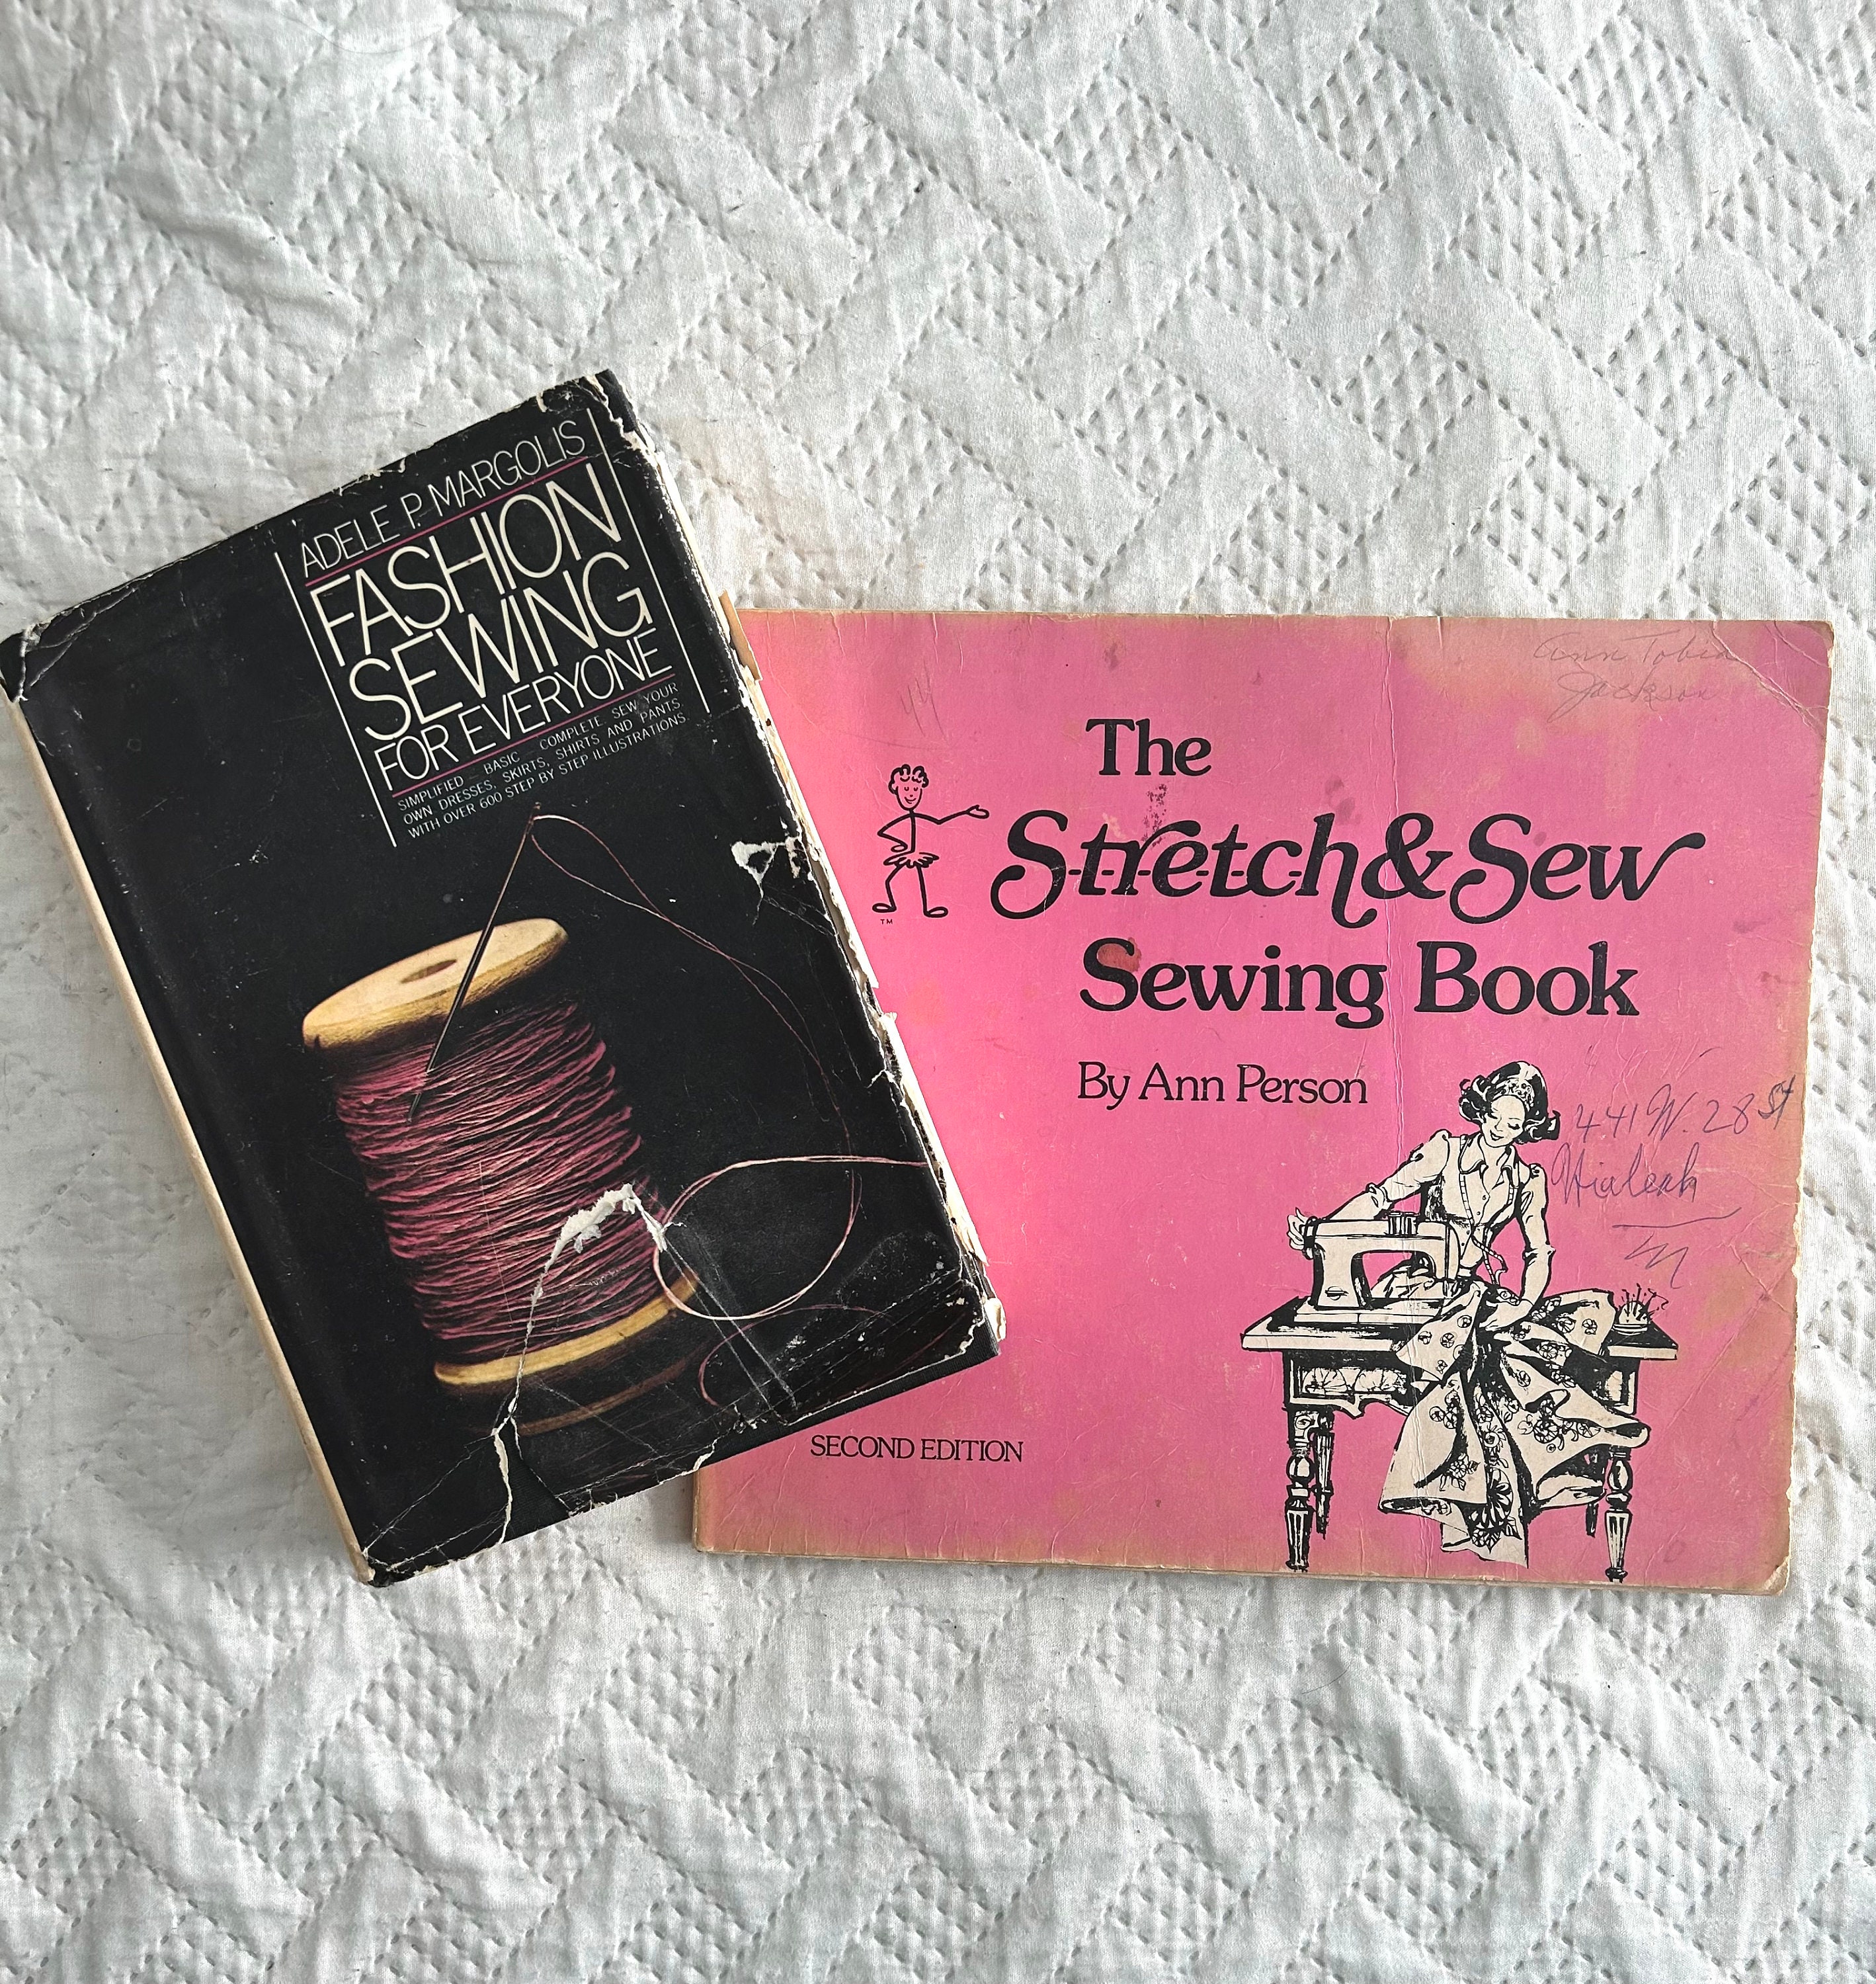 2 Vintage Sewing Books 1970s Better Homes and Gardens Sewing Book, Mccall's  Sewing for Your Home FREE VINTAGE MACRAME Magazine 